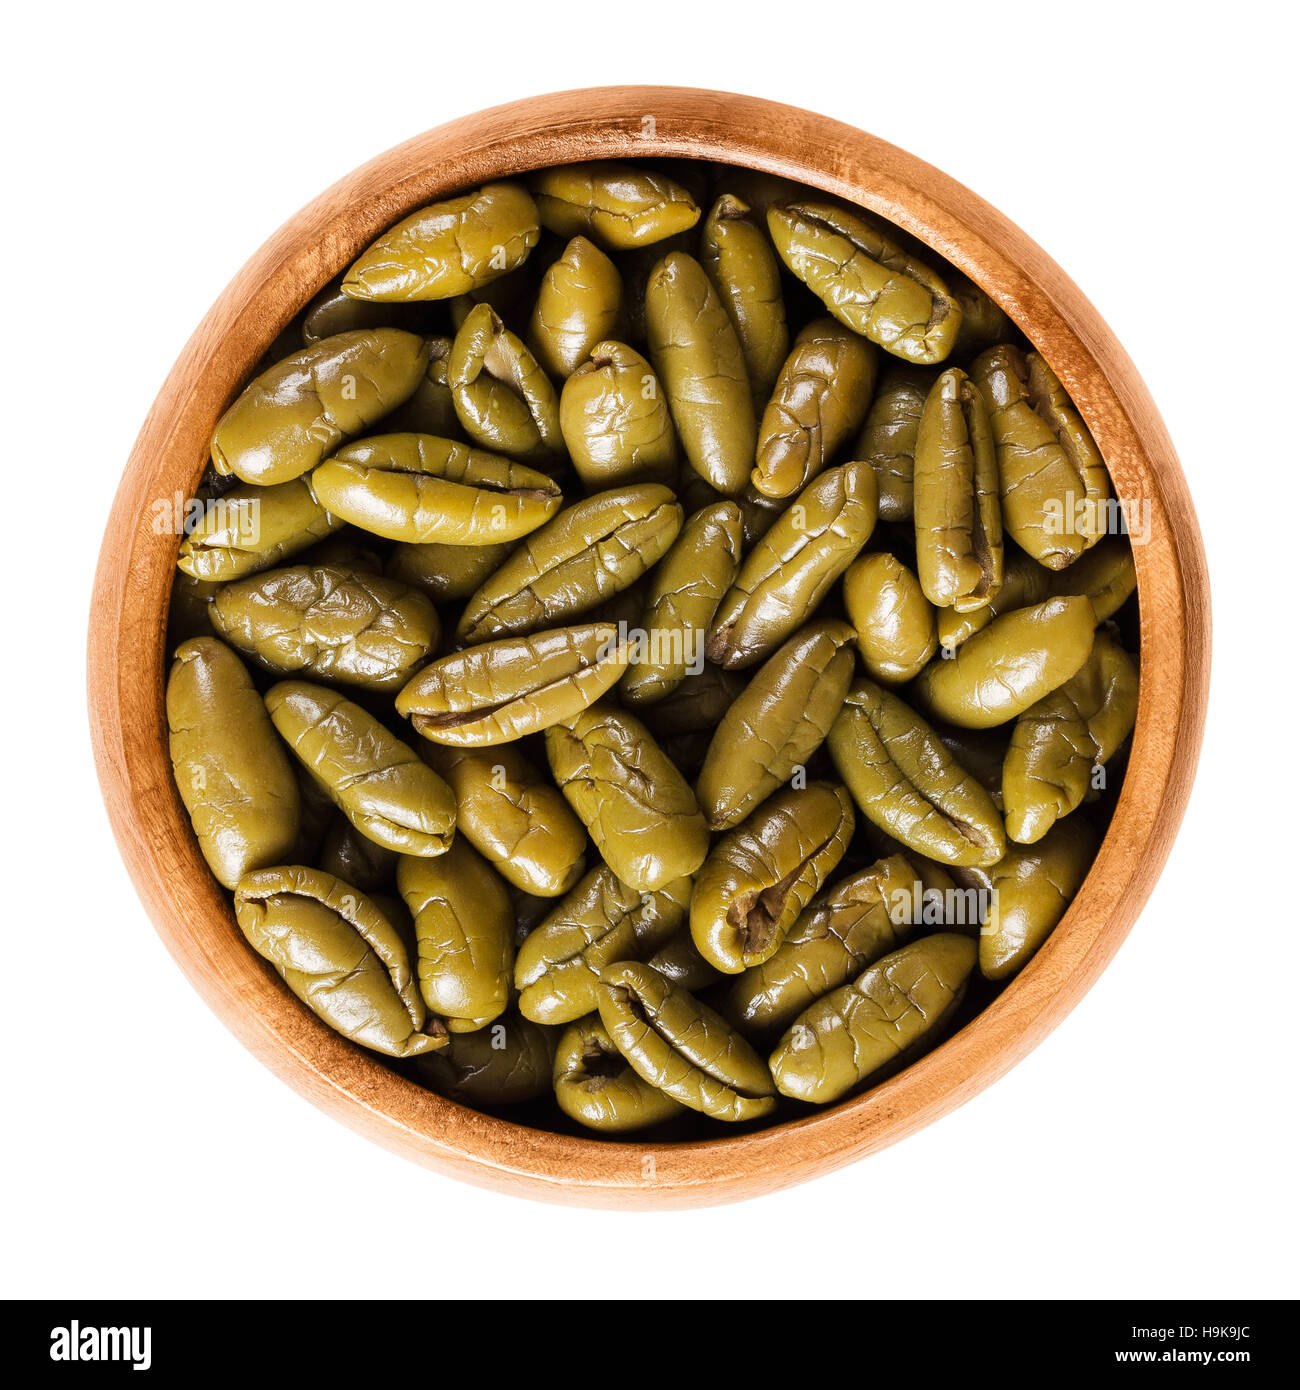 Dried green olive halves in a wooden bowl. Half table olives, dried ripe fruits of Olea europaea. Isolated macro food photo. Stock Photo